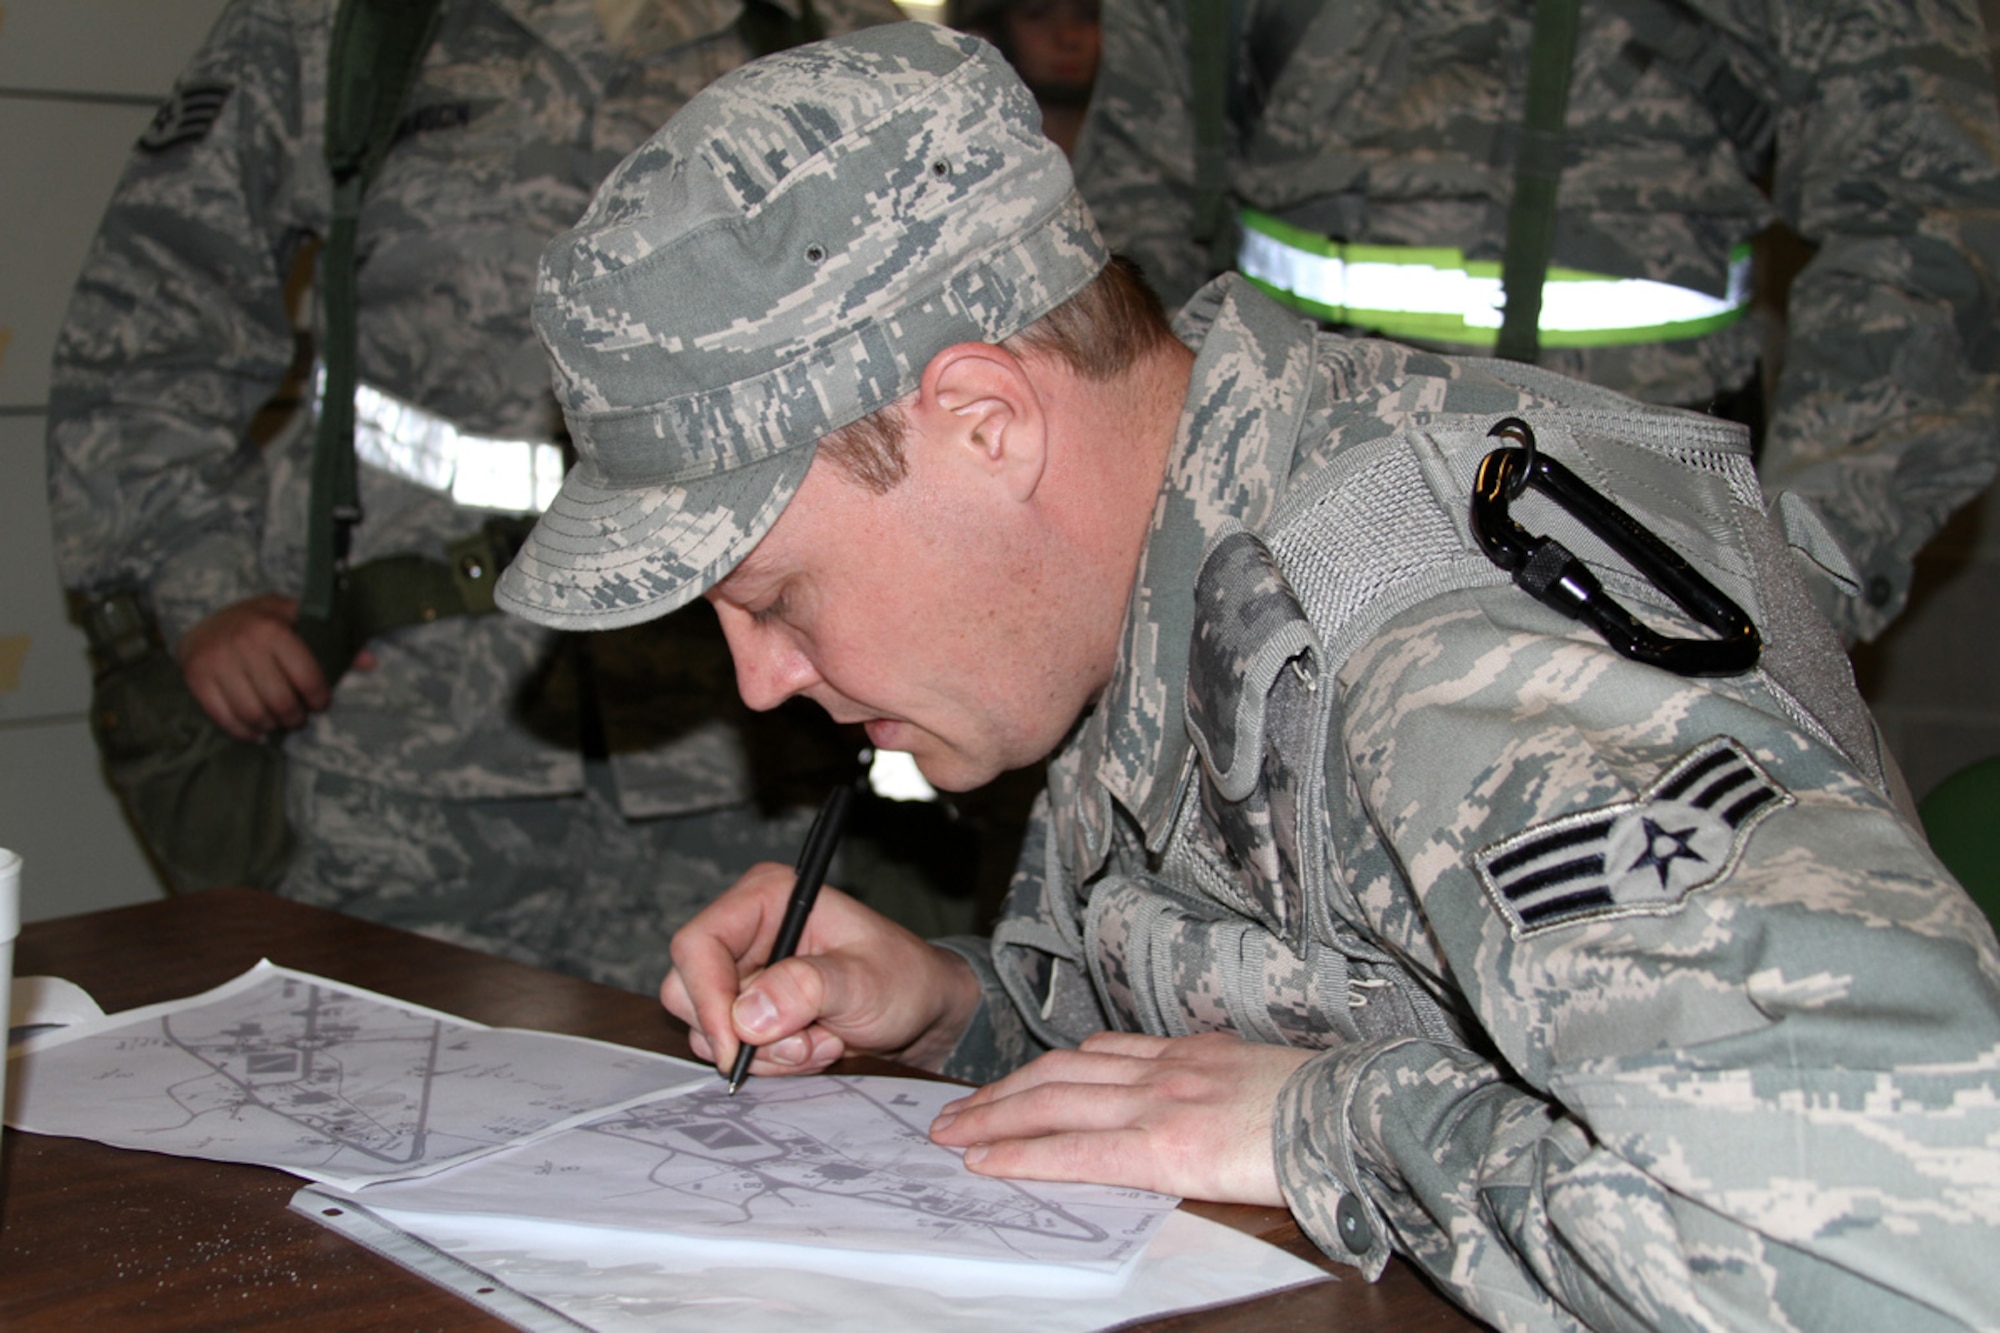 Senior Airman Ryan Dunlap plots out points on a map at the Georgia National Guard Combat Readiness Training Center, Feb. 19, 2012. Dunlap, a member of the 127th Civil Engineer Squadron at Selfridge Air National Guard Base, Mich., was participating in the Global Guardian training exercise, Feb. 13-24. During the exercise, more than 1,300 Soldiers and Airmen of the National Guard, as well as members of the Royal Netherland Air Force and Canadian Air Force, trained to respond to a terrorist attack or natural disaster in the U.S. Approximately a half dozen Airmen from Selfridge participated in the exercise, which included military personnel from more than 20 states. In addition to allowing the participating personnel to work on their individual skills, the exercise provided an opportunity for team building across the various units of the National Guard. (U.S. Air Force photo by TSgt Jaclyn Carver)